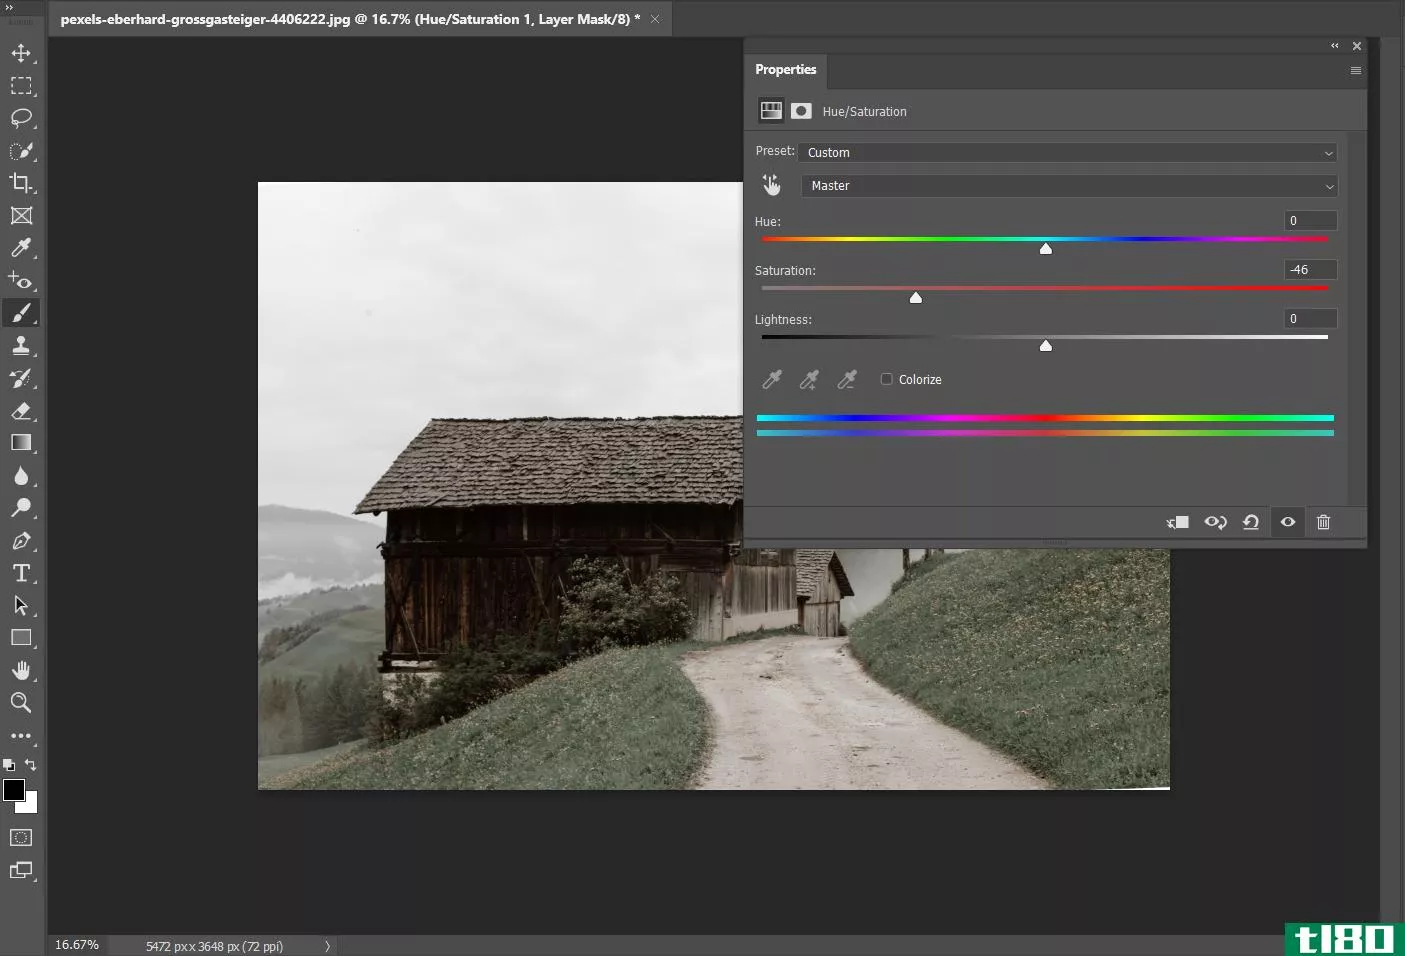 Adjusting hue and saturation in Photoshop